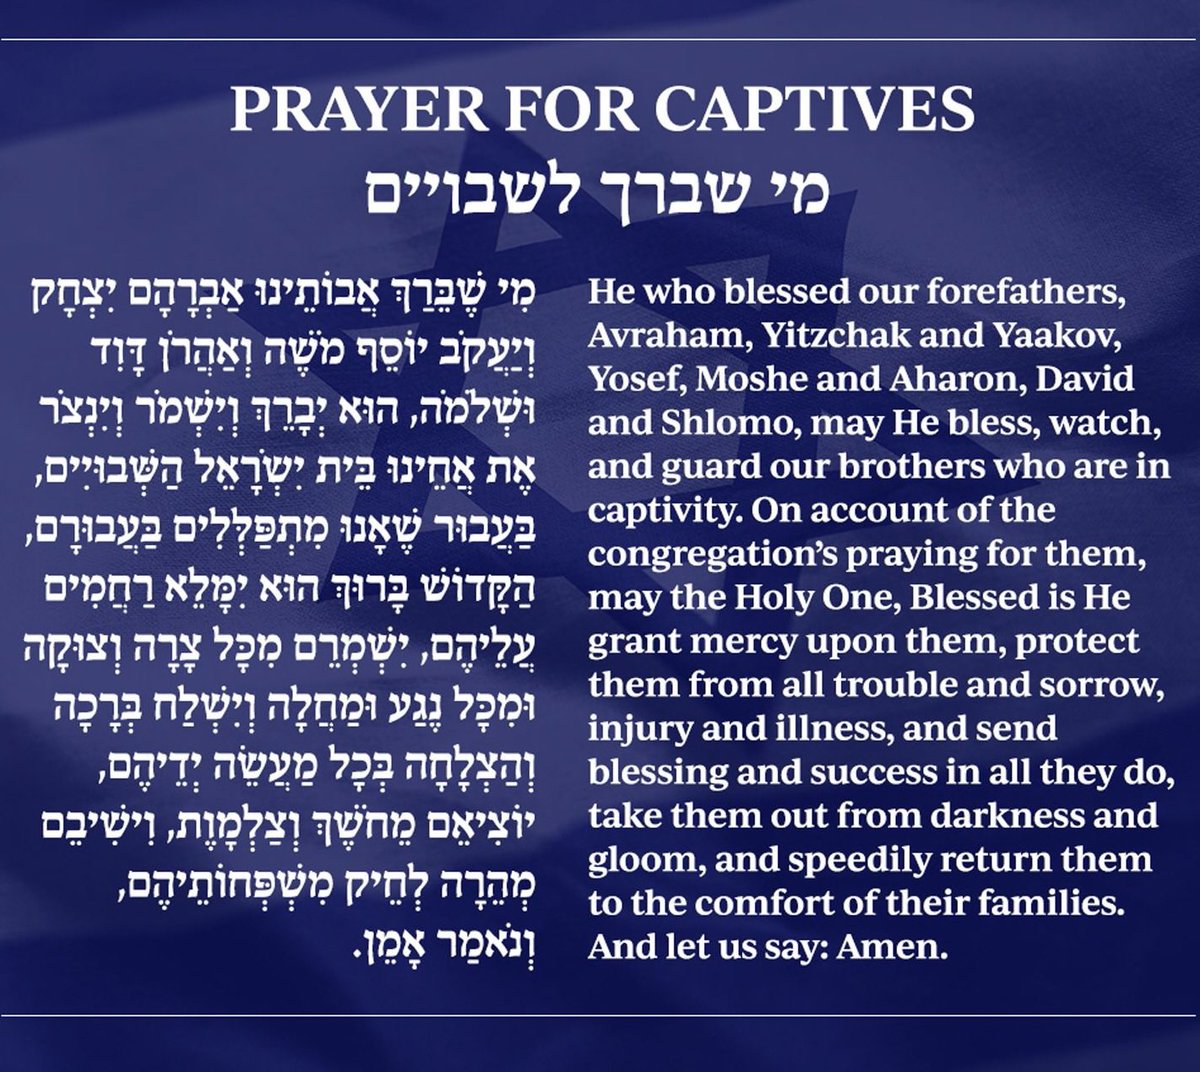 A prayer to be recited at the Passover for the innocent Muslim, Jewish, Christian, Thai, American adults & children being held captive by the Hamas Terror Organization. 🇮🇱